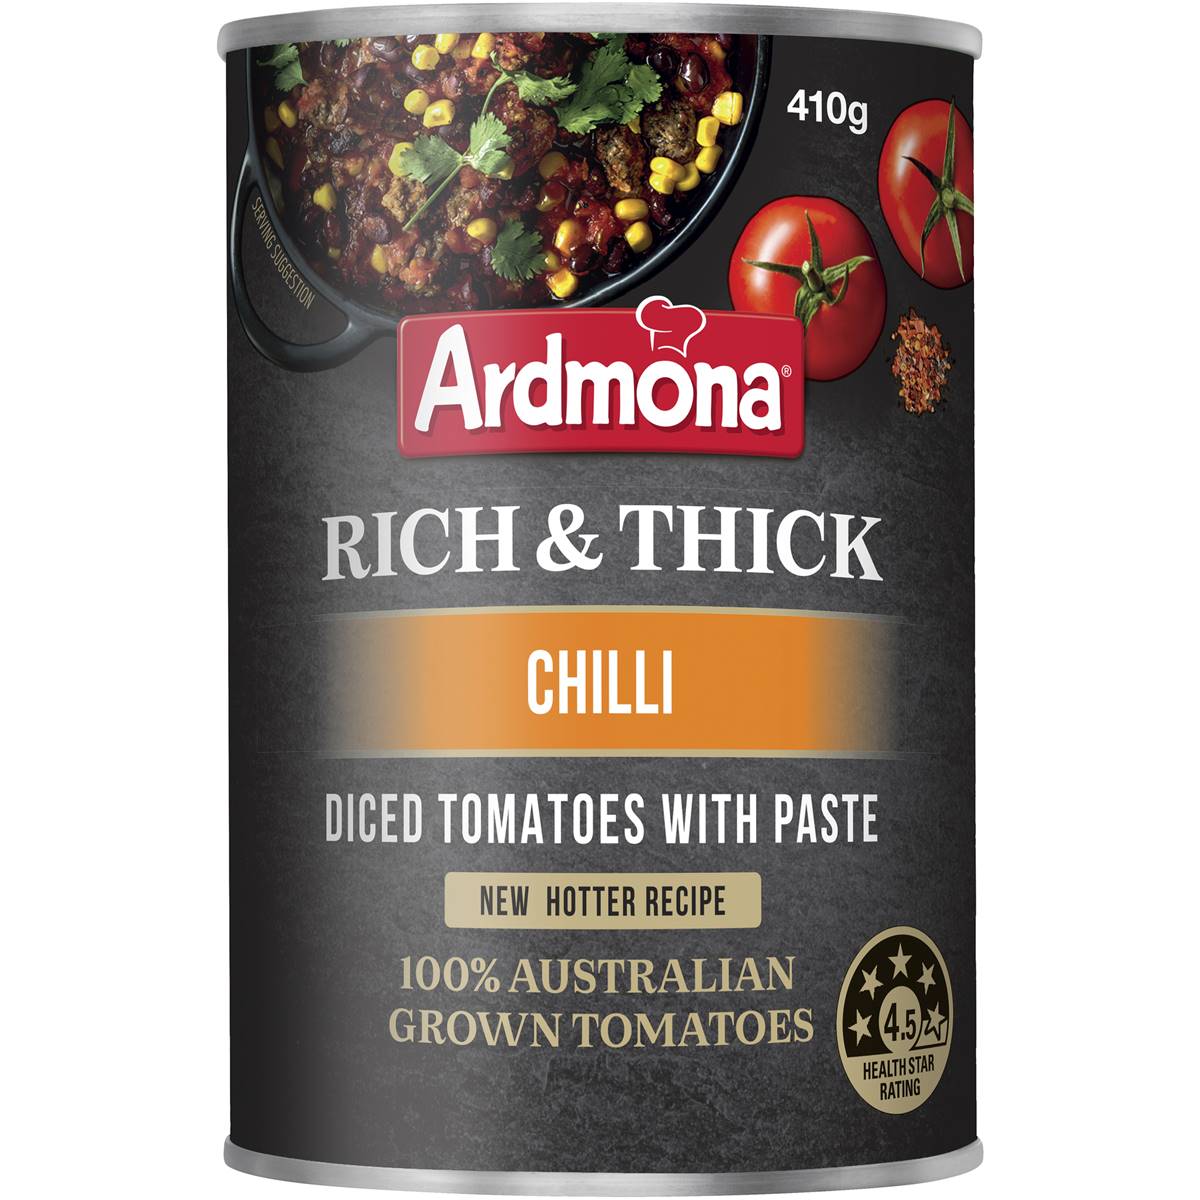 Ardmona Rich & Thick Diced Tomatoes With Paste Chilli 410g